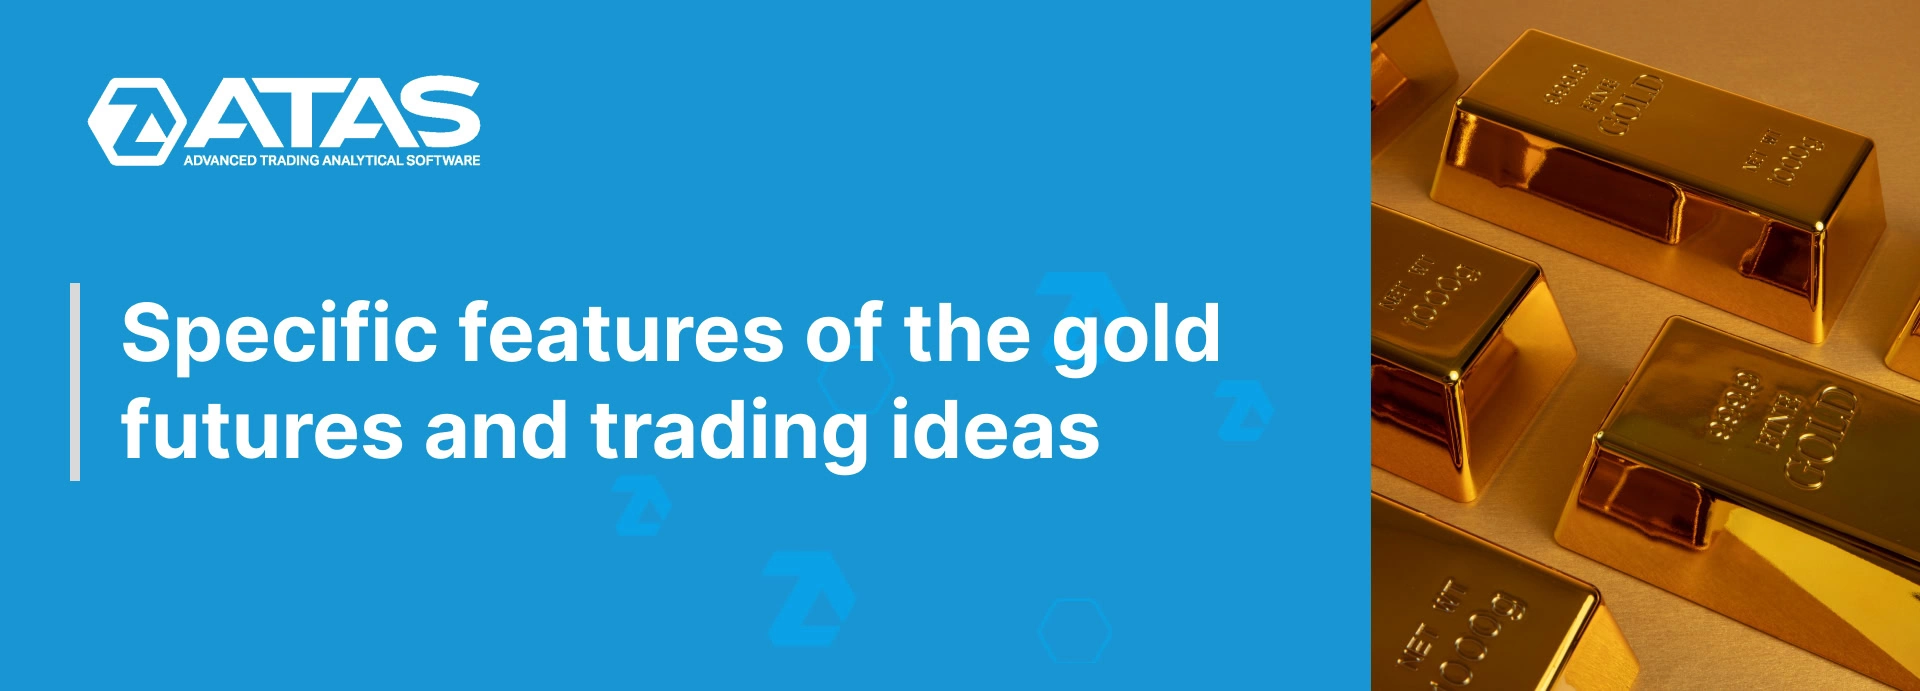 Specific features of the gold futures and trading ideas.